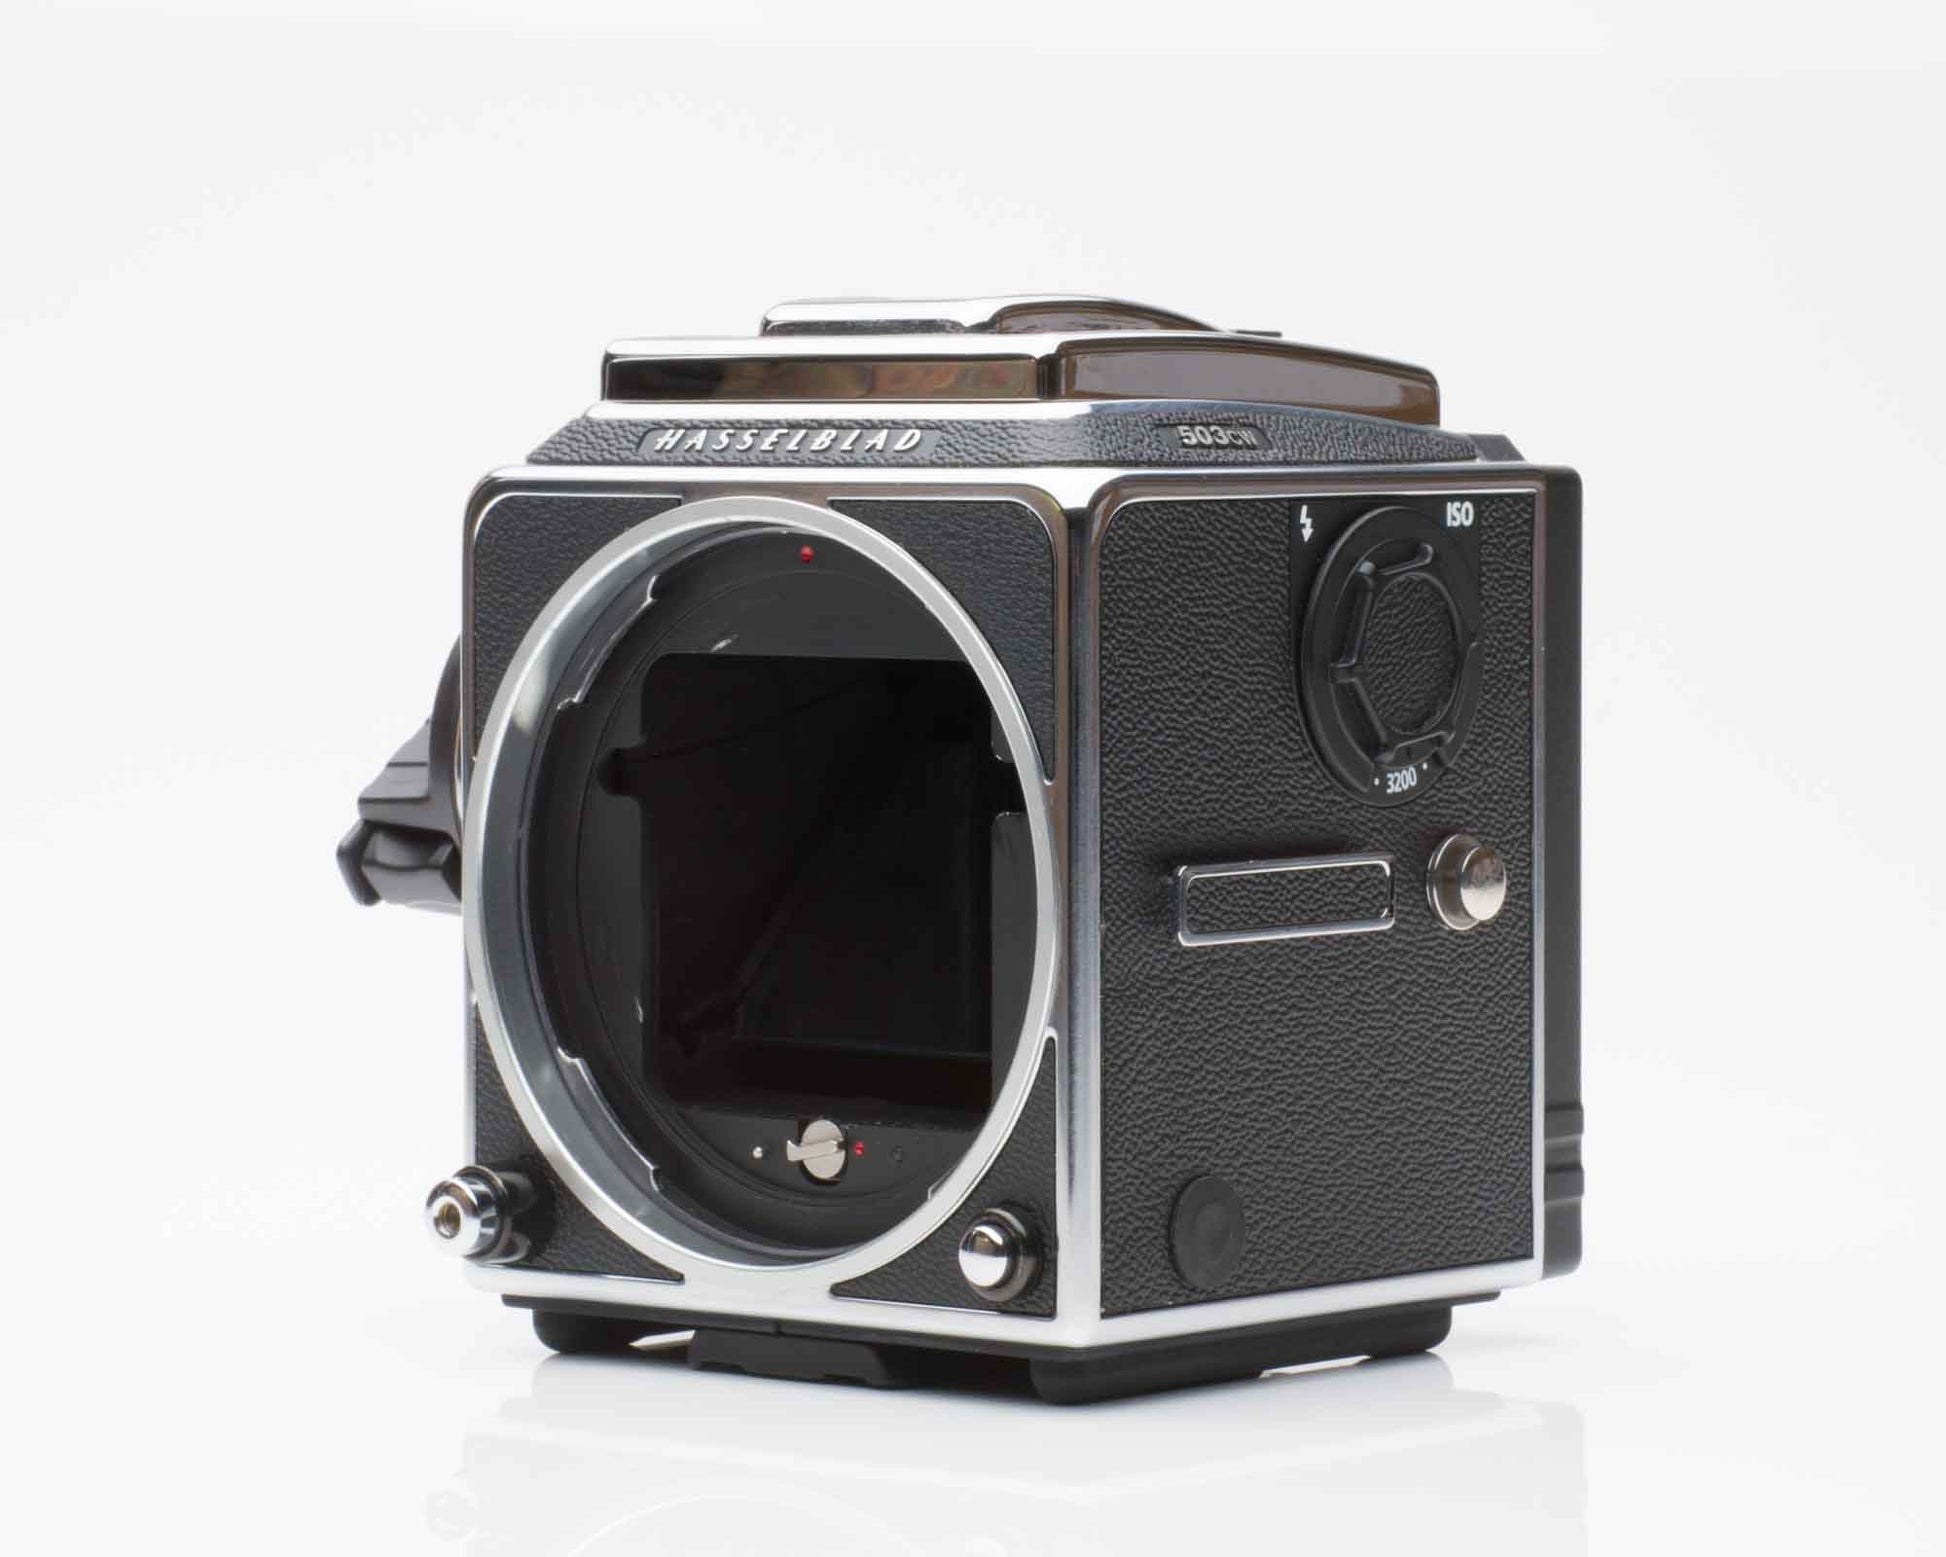 Hasselblad 503CW Chrome Body with Acute Matte D 42204 ISO 3200 